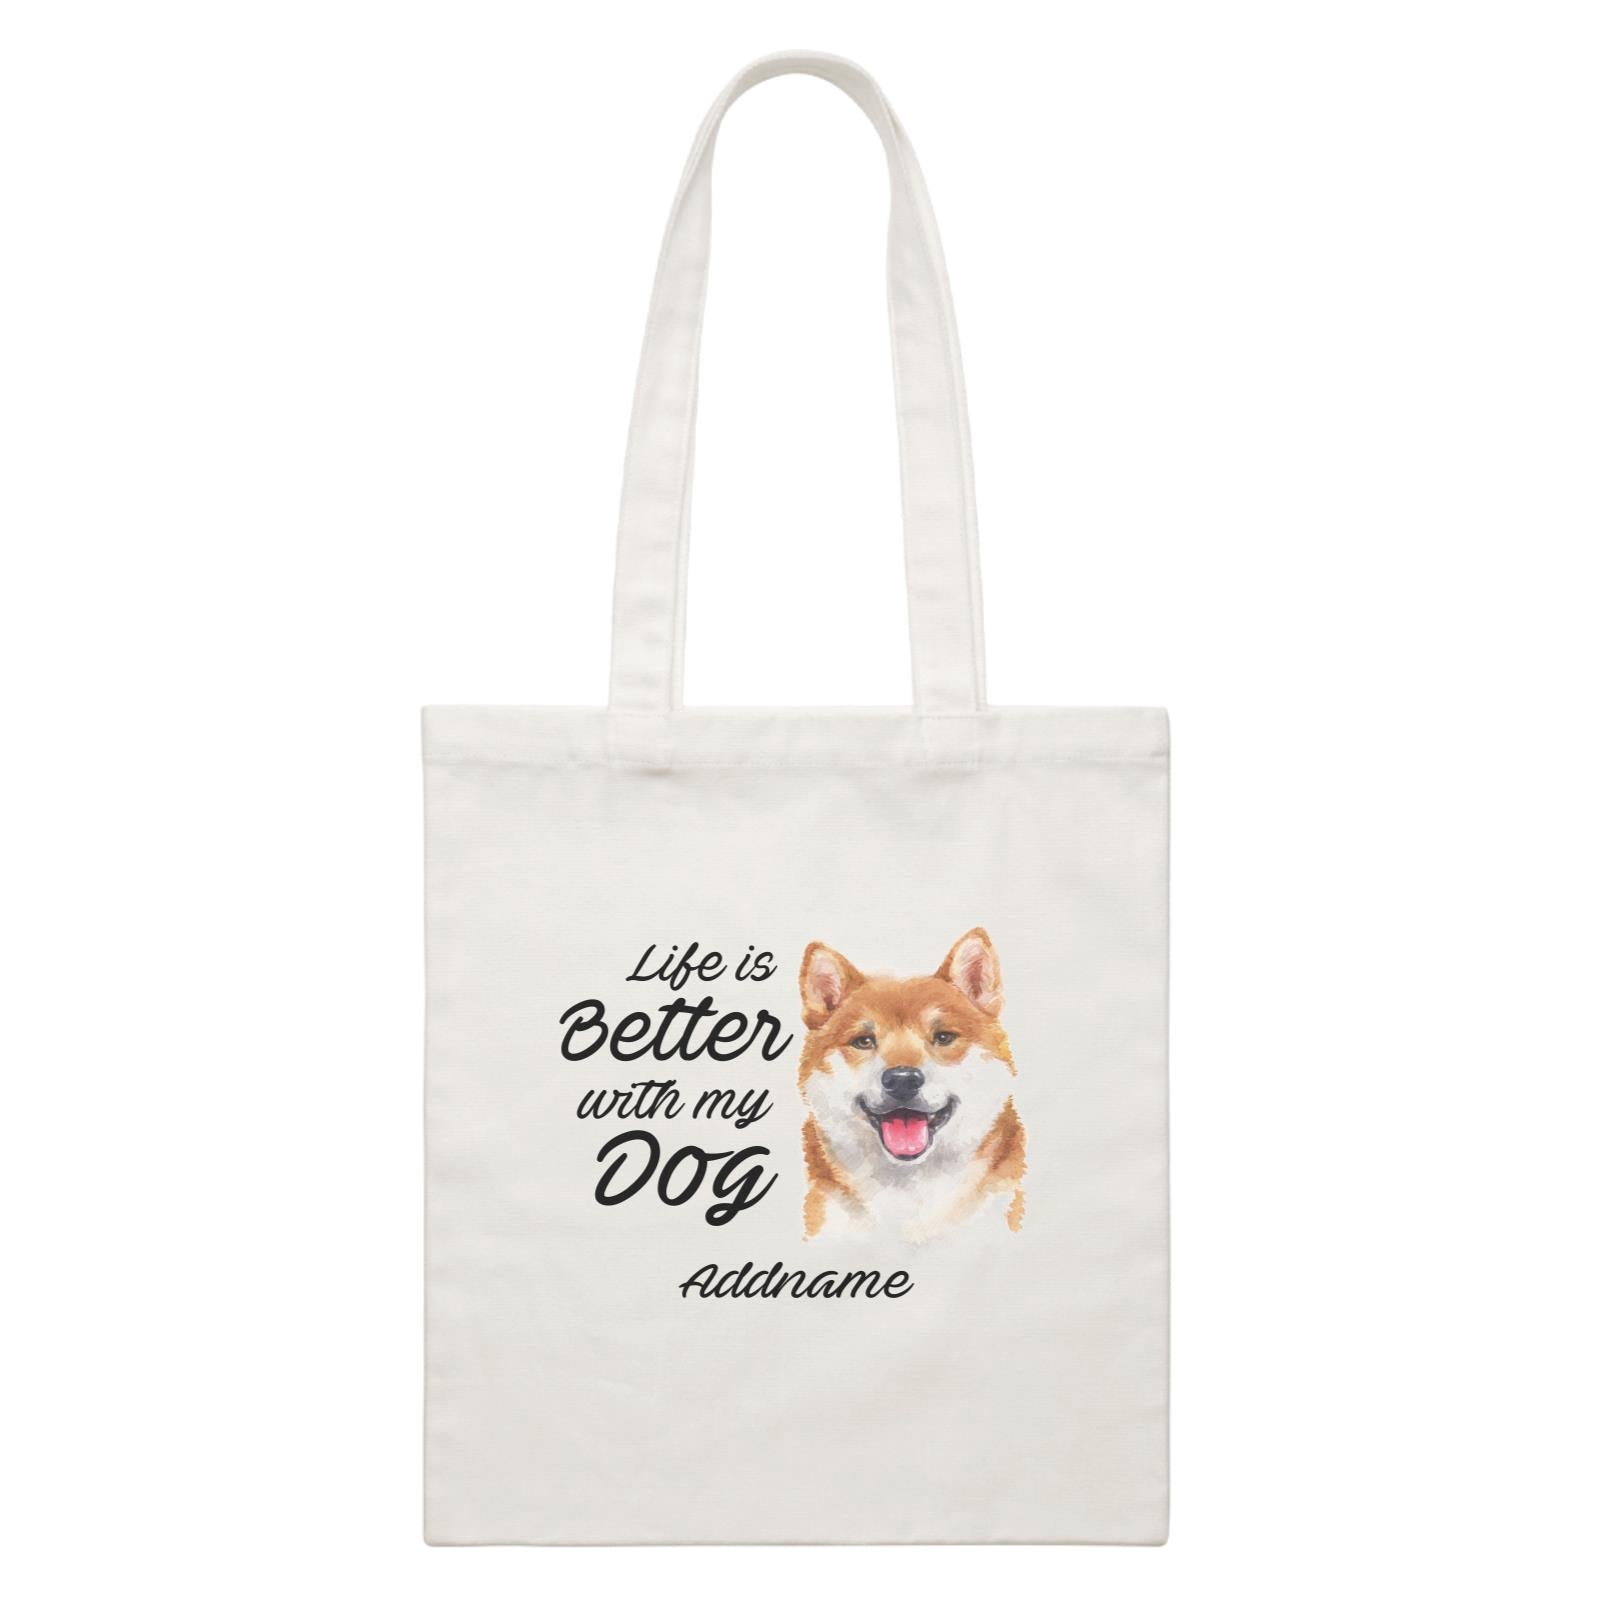 Watercolor Life is Better With My Dog Shiba Inu Addname White Canvas Bag